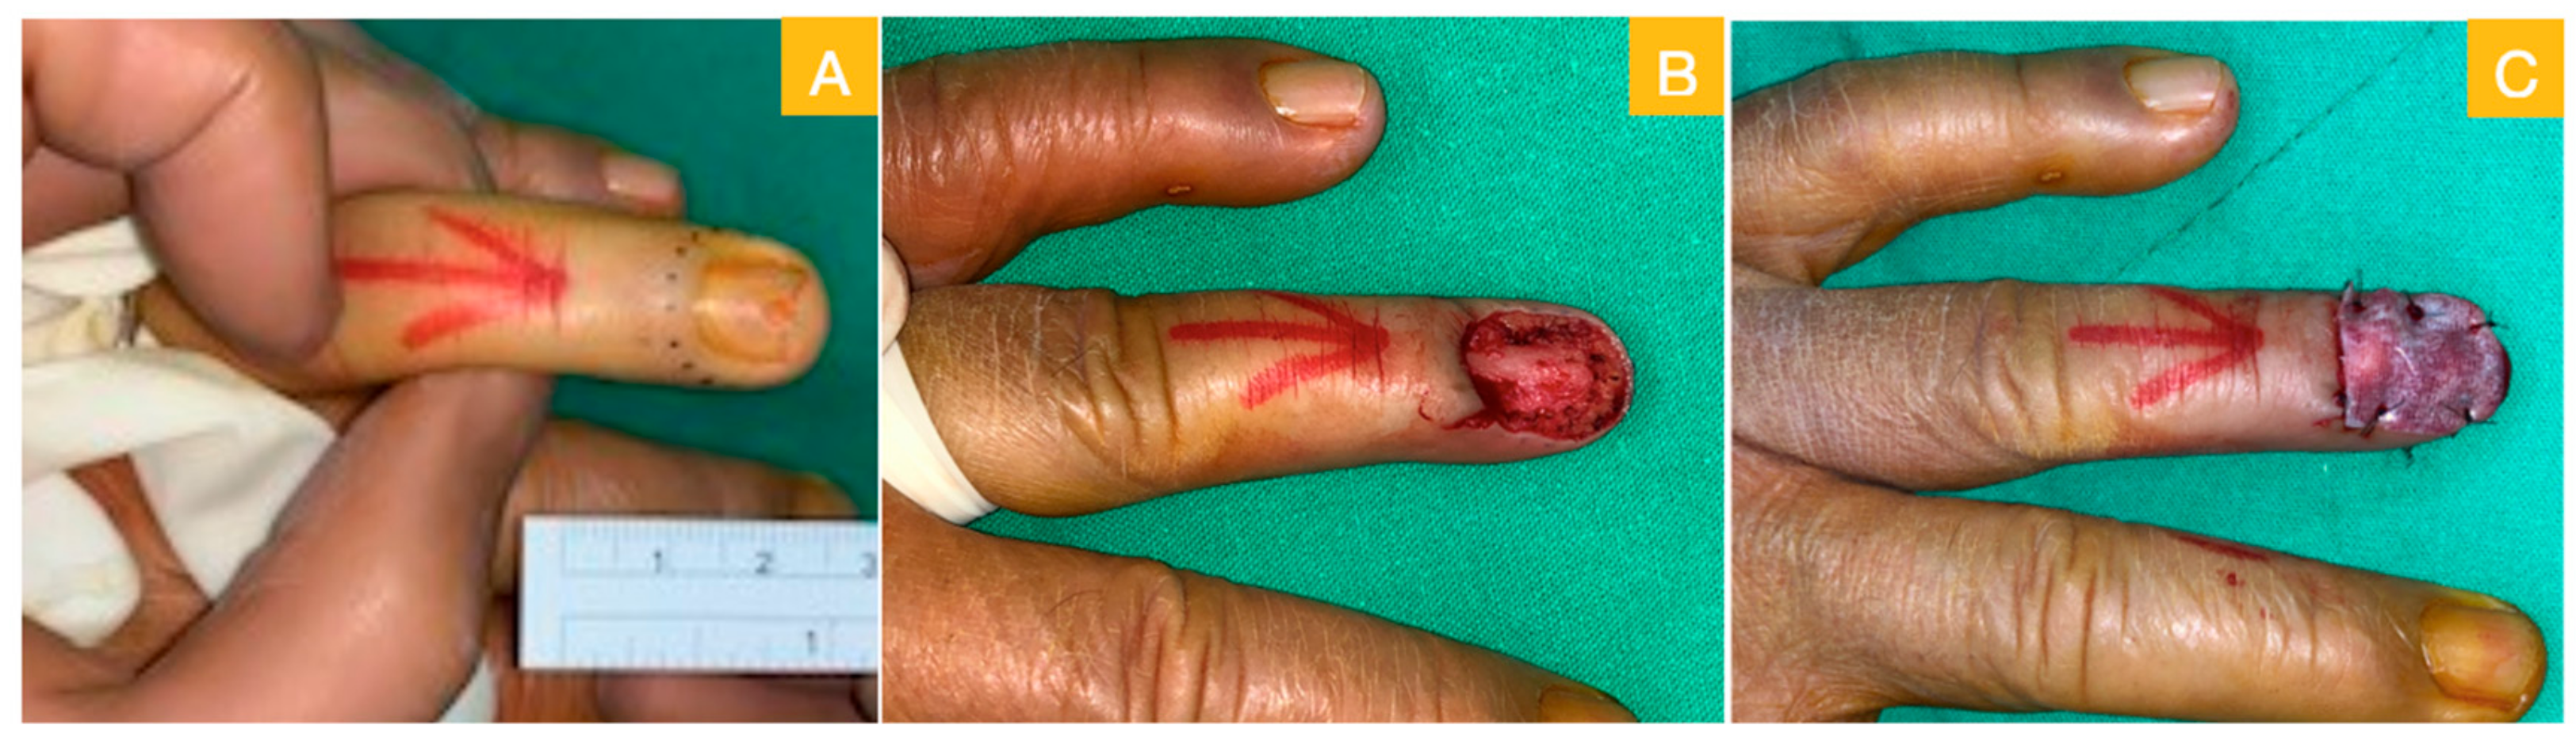 Medicina | Free Full-Text | Reconstruction for Defects of Total Nail Bed  and Germinal Matrix Loss with Acellular Dermal Matrix Coverage and  Subsequently Skin Graft